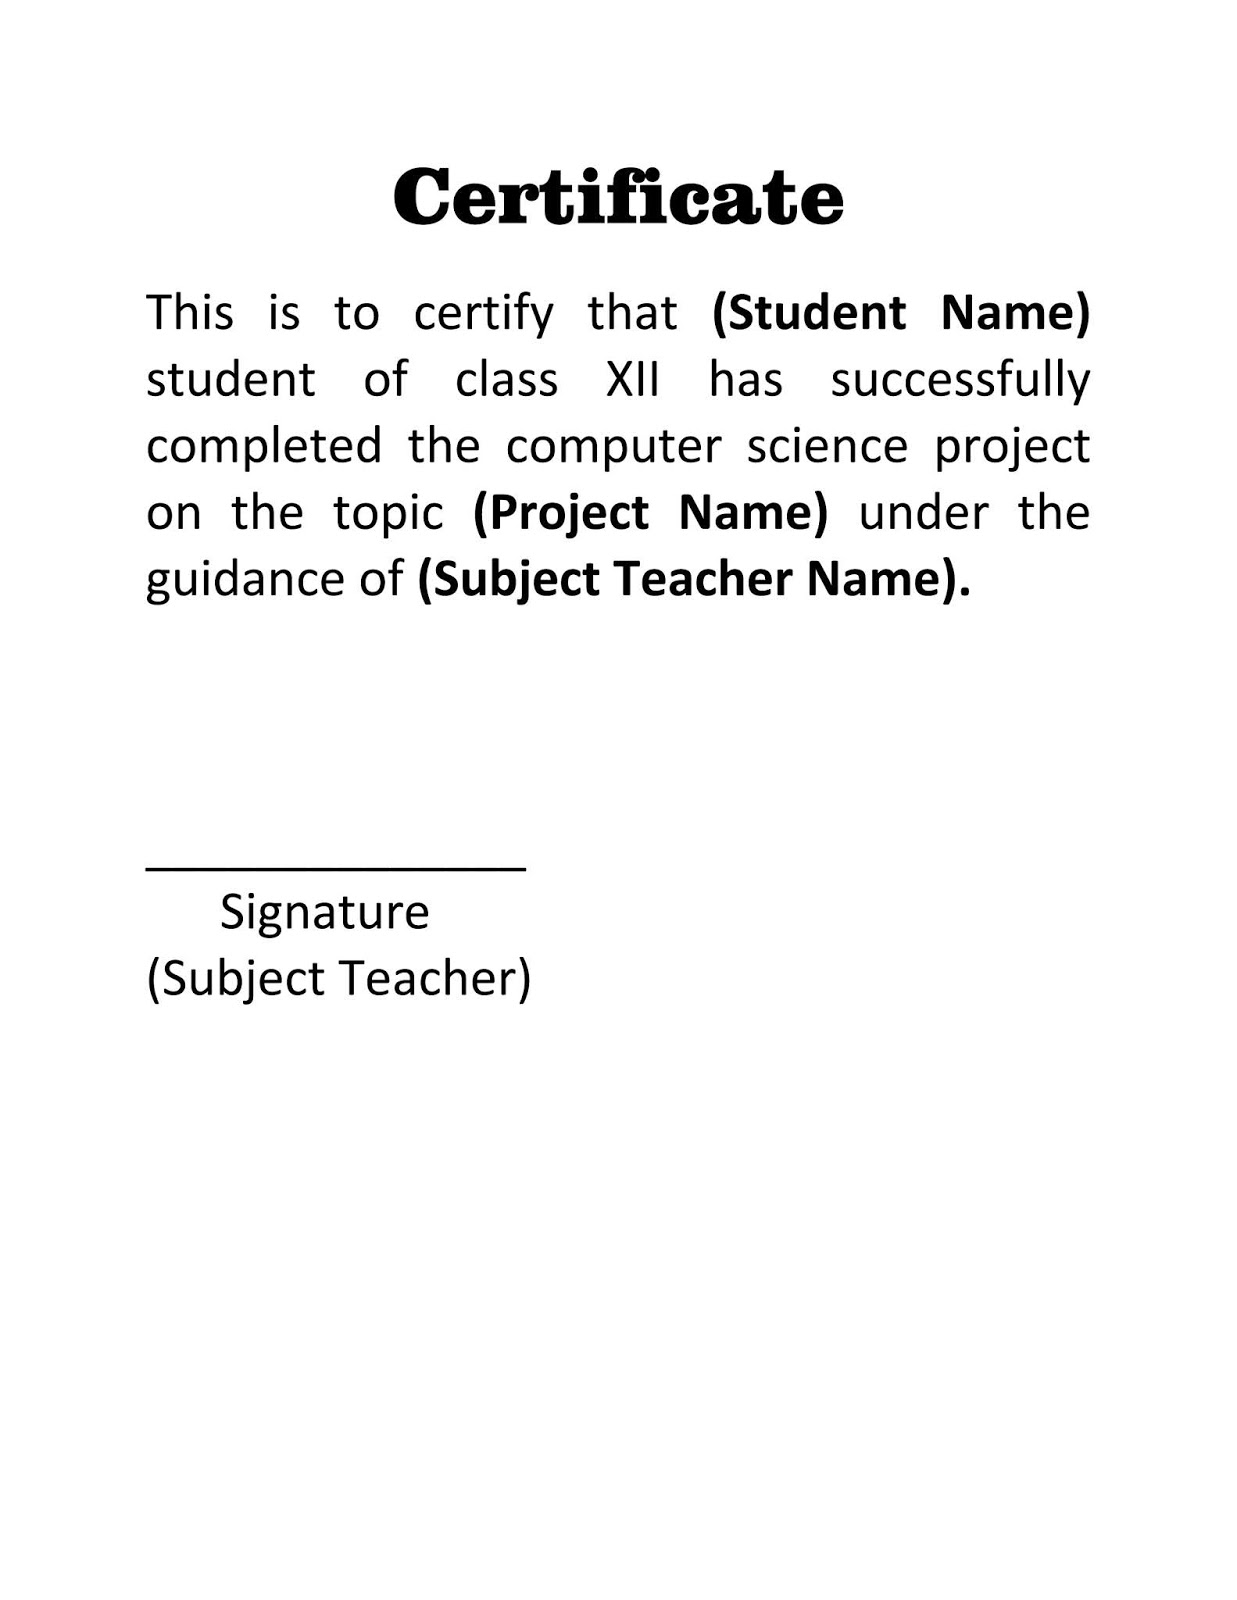 assignment certificate page